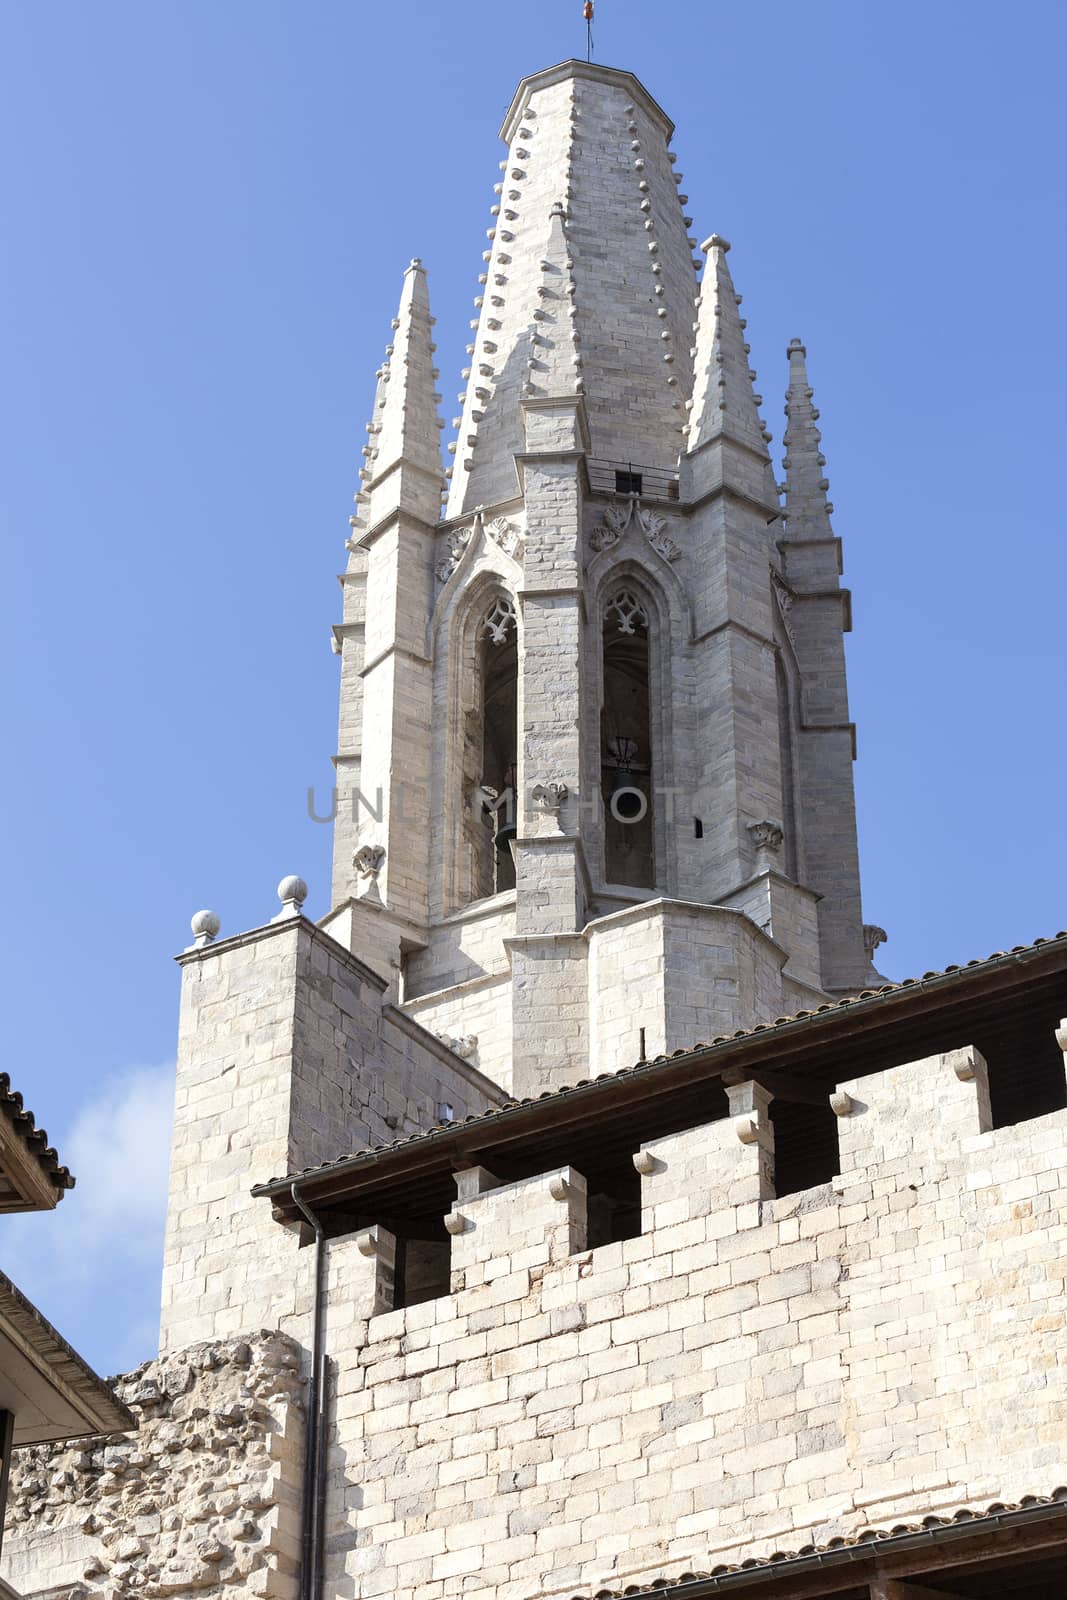 Tower of Cathedral of Saint Mary of Girona, Catalonia, Spain.